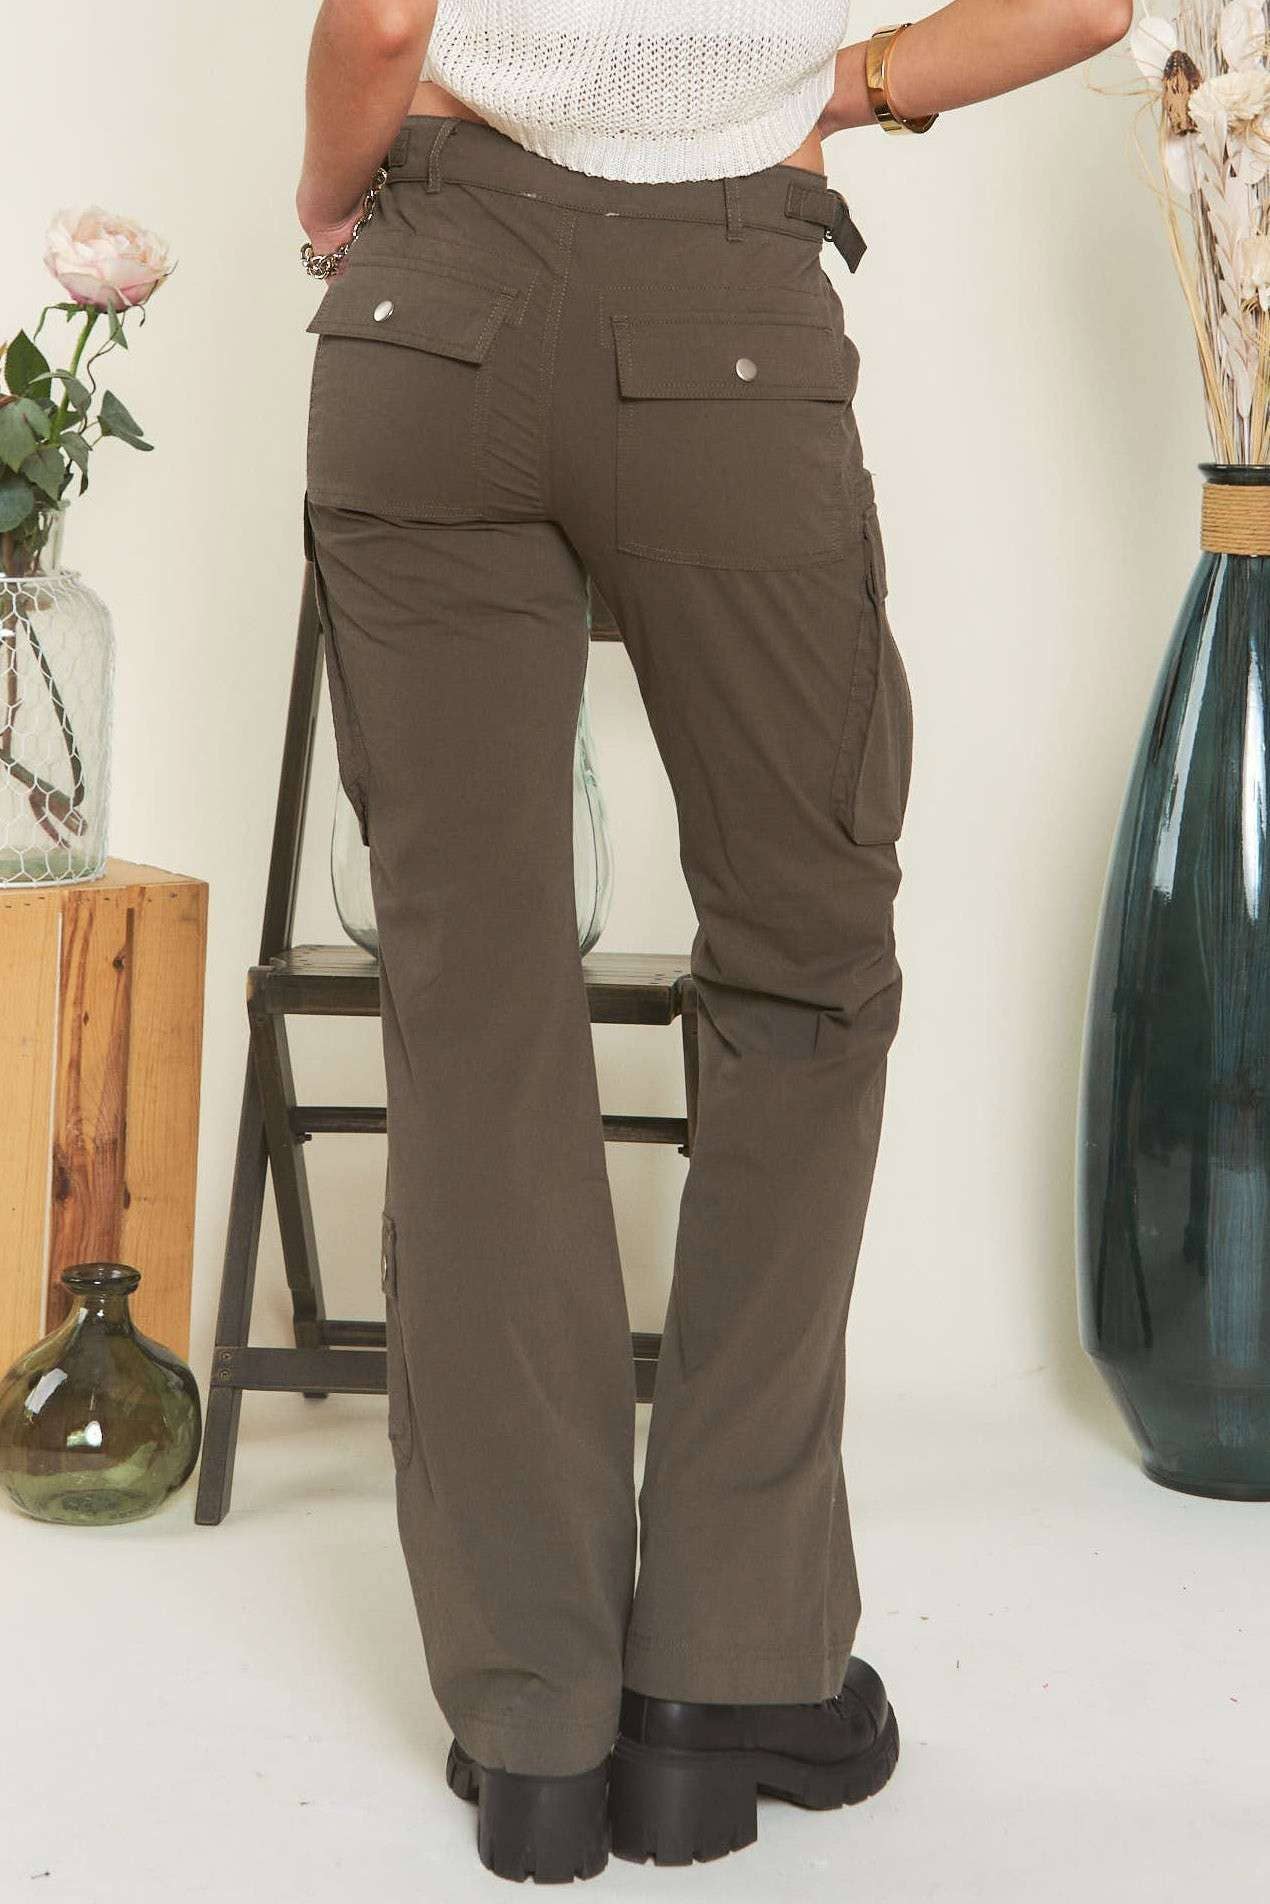 Madelyn - LEP3206 - LOW RISE STRAIGHT CARGO PANTS